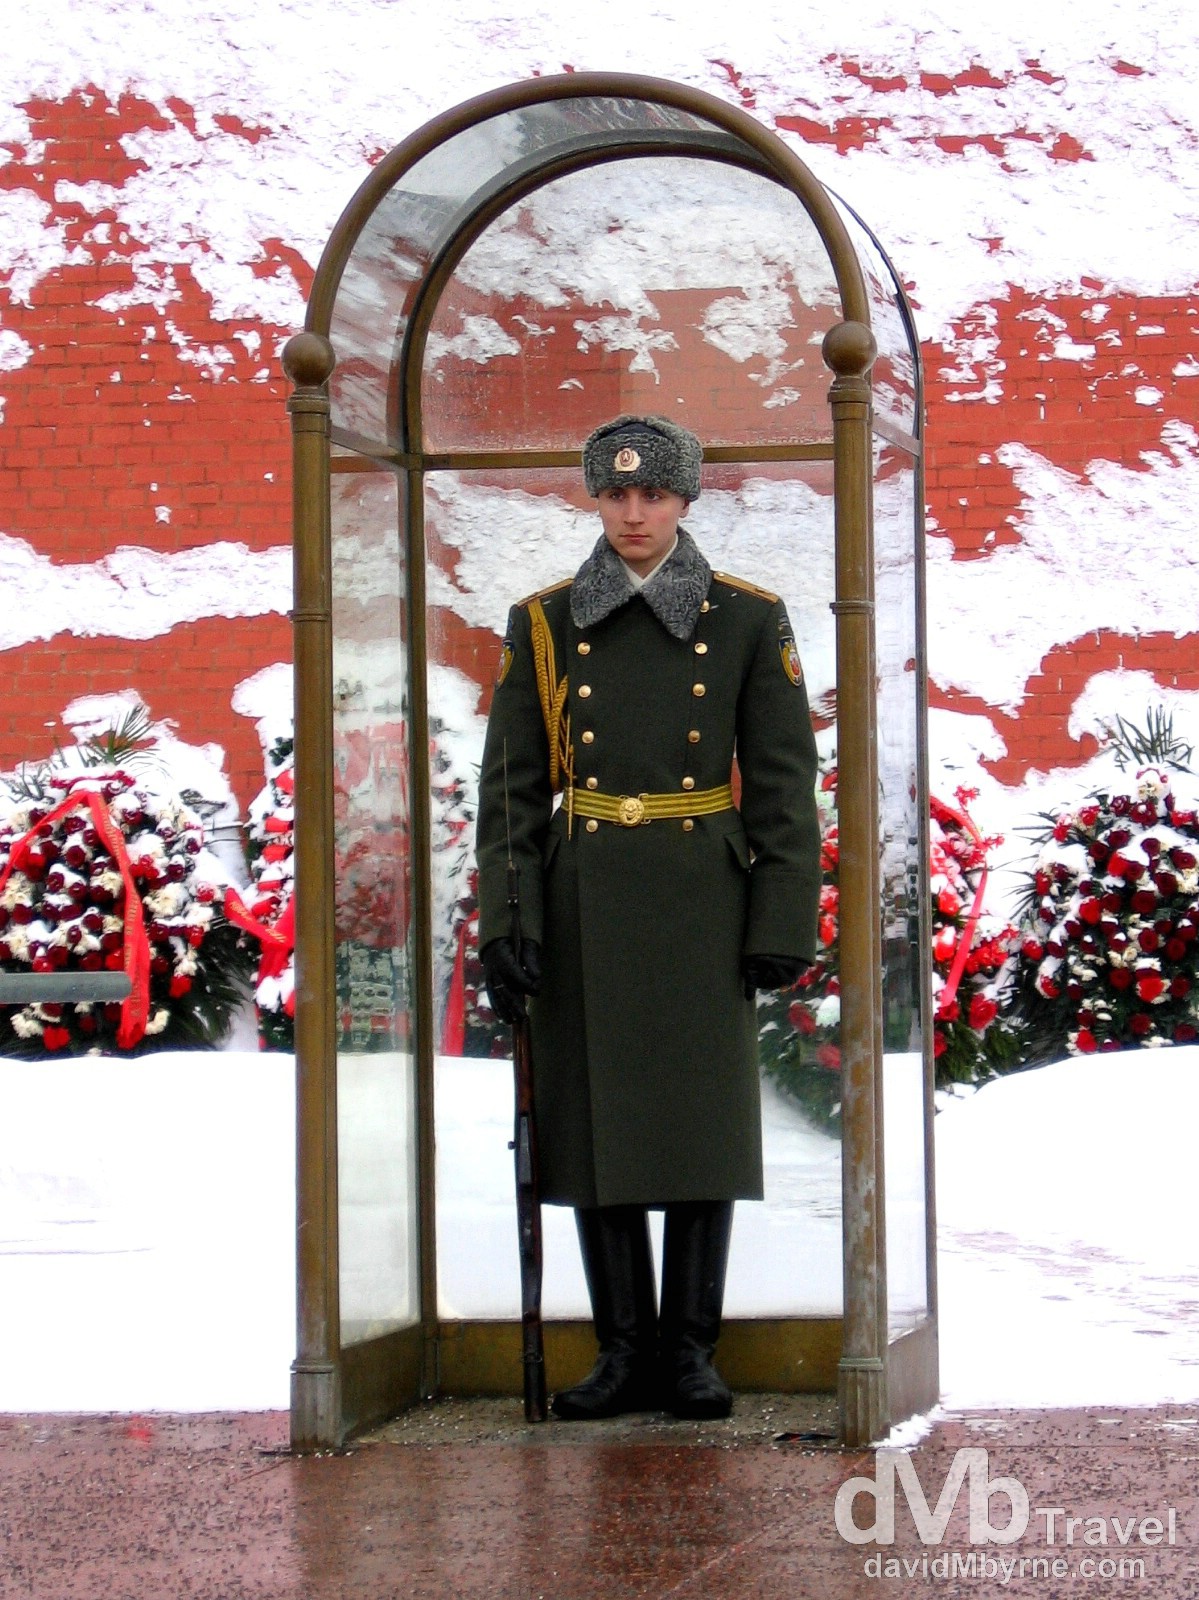 A guard at the Tomb of The Unknown Soldier at the base of walls of the Kremlin in Alexandrrowsky Garden, Moscow, Russia. February 25, 2006.